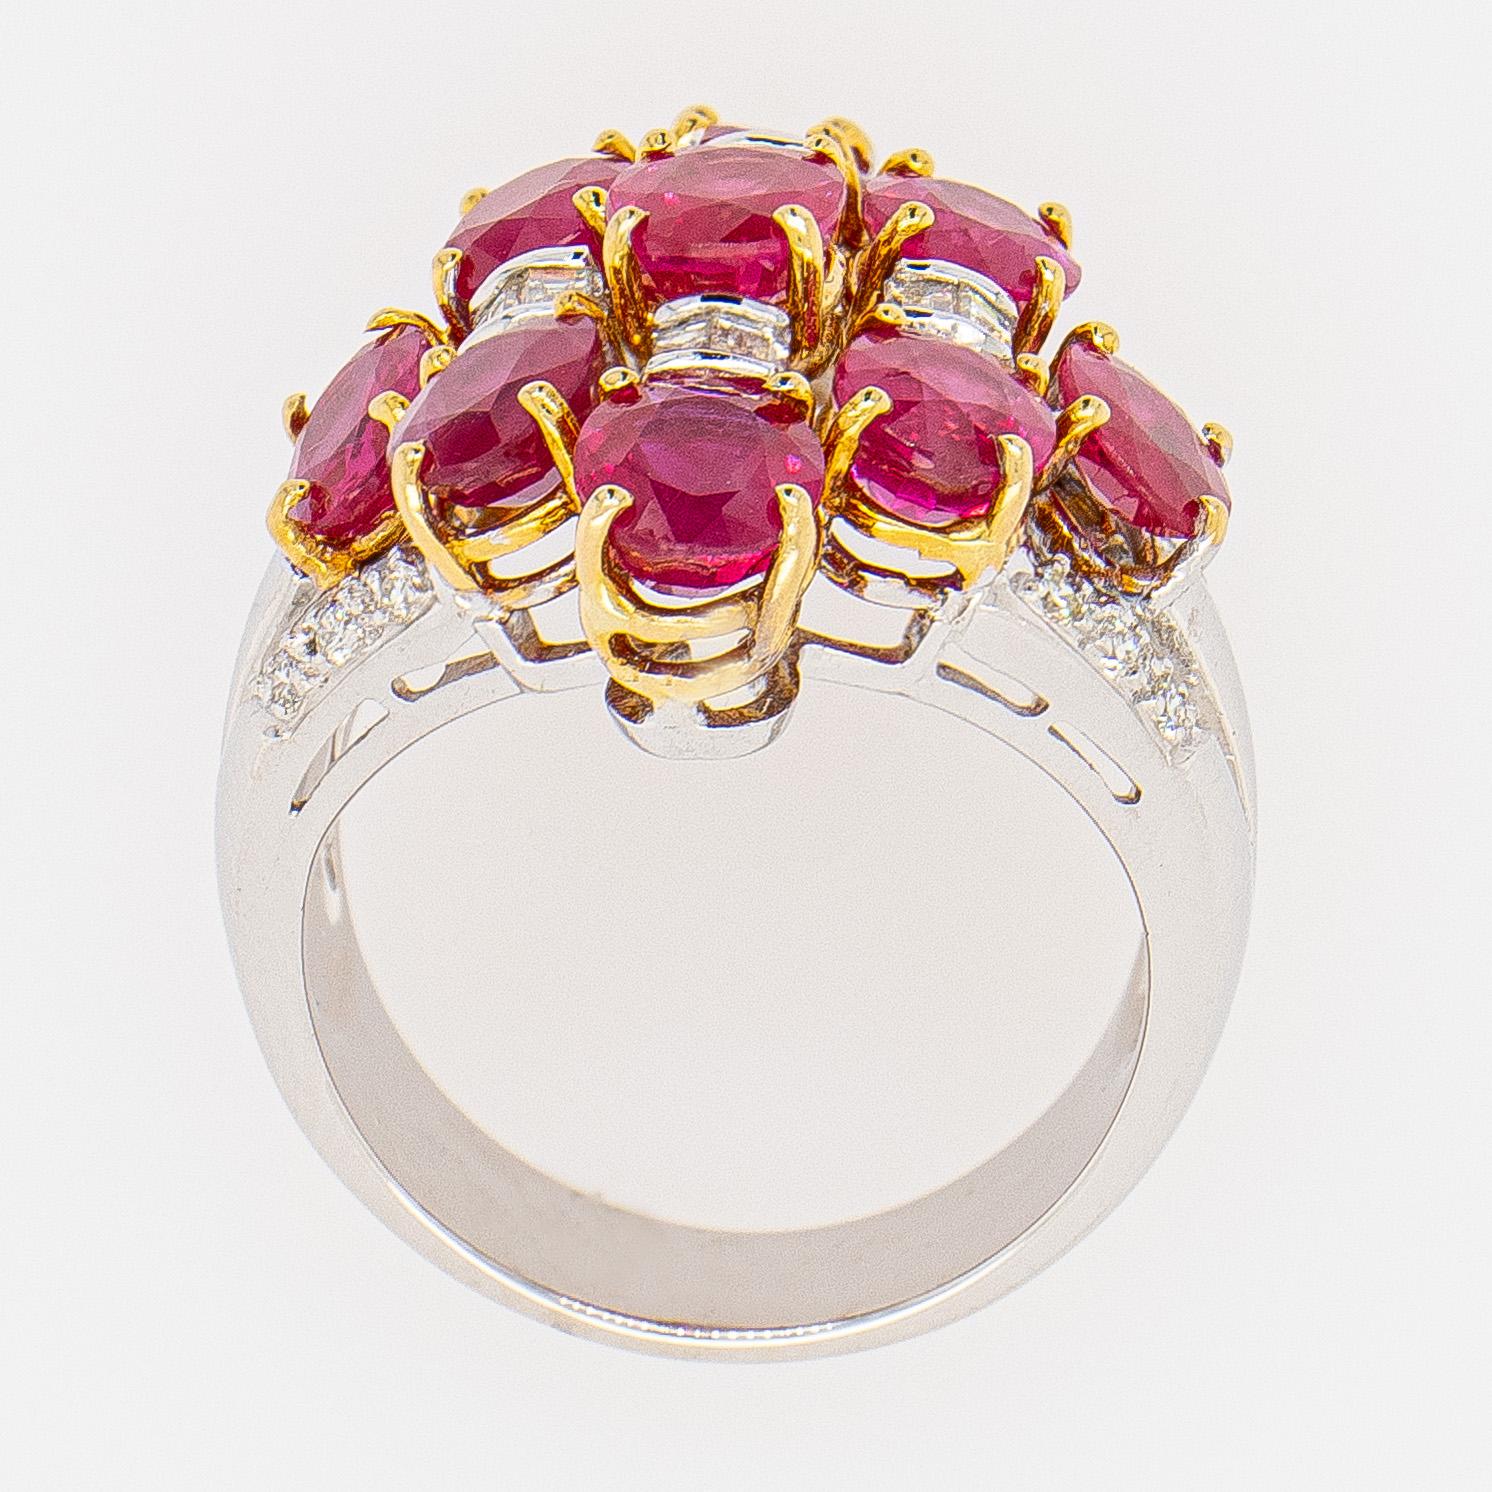 Art Deco Ring Oval Rubies 7.04 Carats and Diamonds 18k Gold In Excellent Condition For Sale In Laguna Niguel, CA